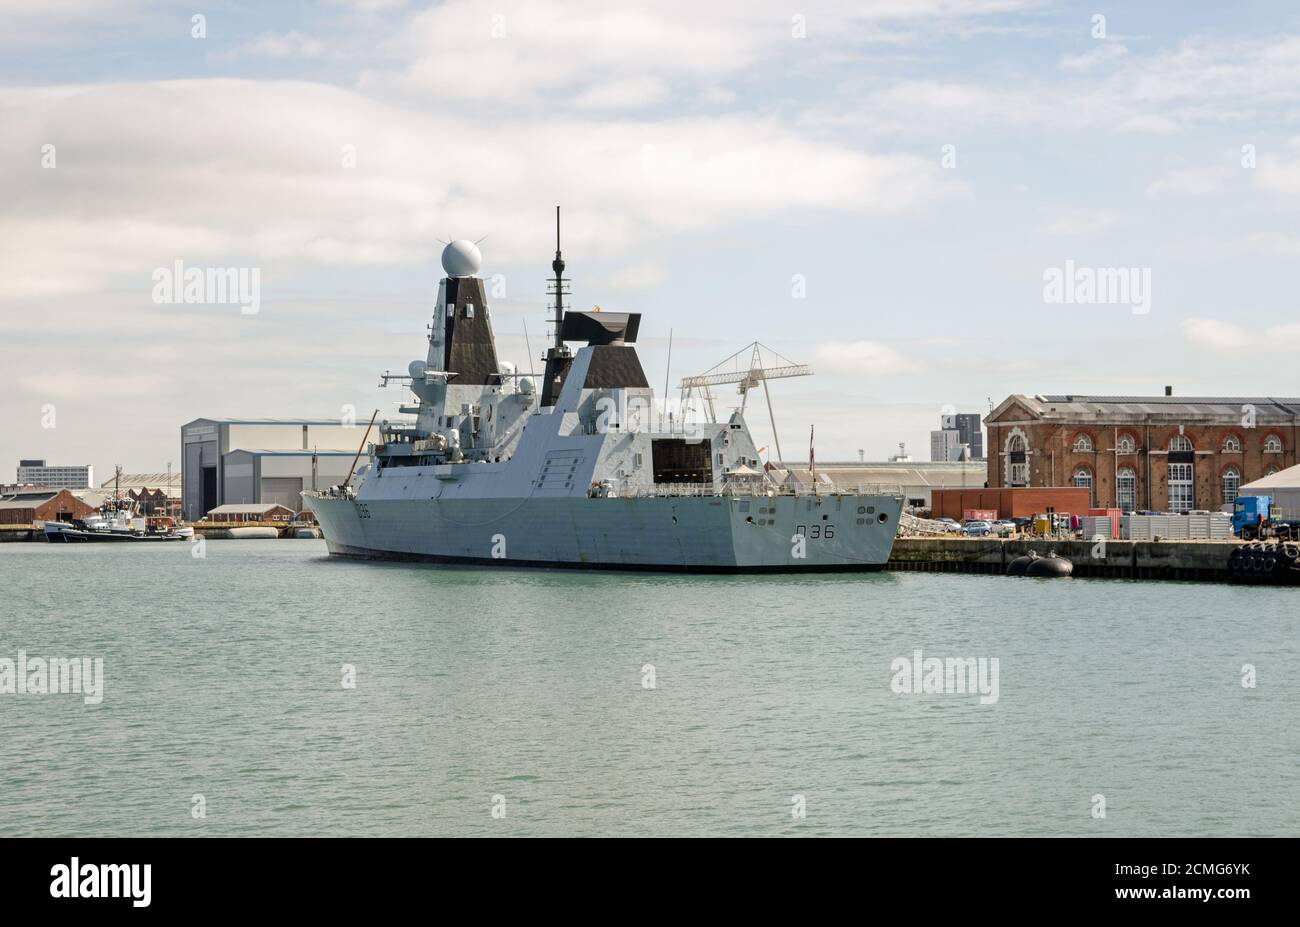 Portsmouth, UK - September 8, 2020: the Royal Navy destroyer HMS Defender, D36, moored at Portsmouth Harbour, Hampshire on a sunny summer day. Stock Photo